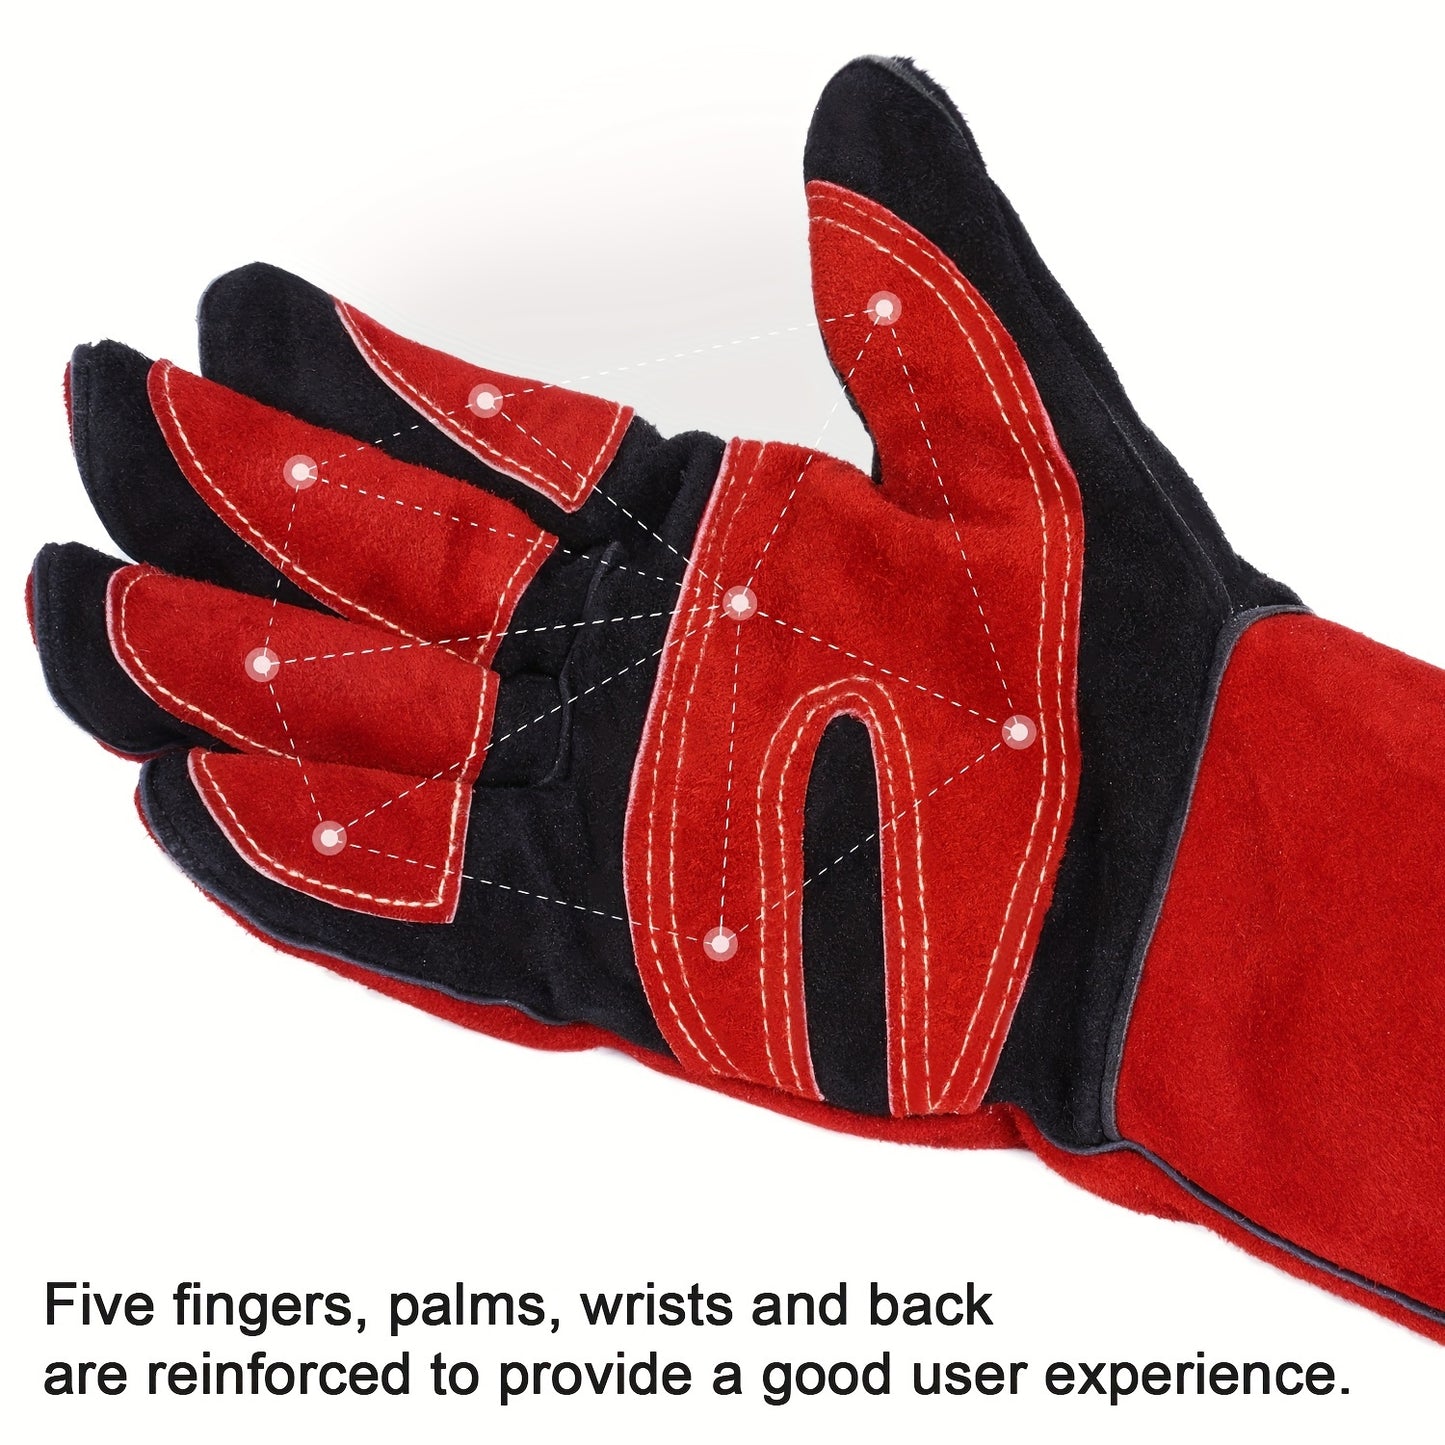 1 Pair ANDELI 14inch Welding Gloves, 572°F TIG/Mig/Welding Gloves Heat/Fire Resistant, BBQ/Oven,Grill,Fireplace Gloves With Extra Long Sleeve